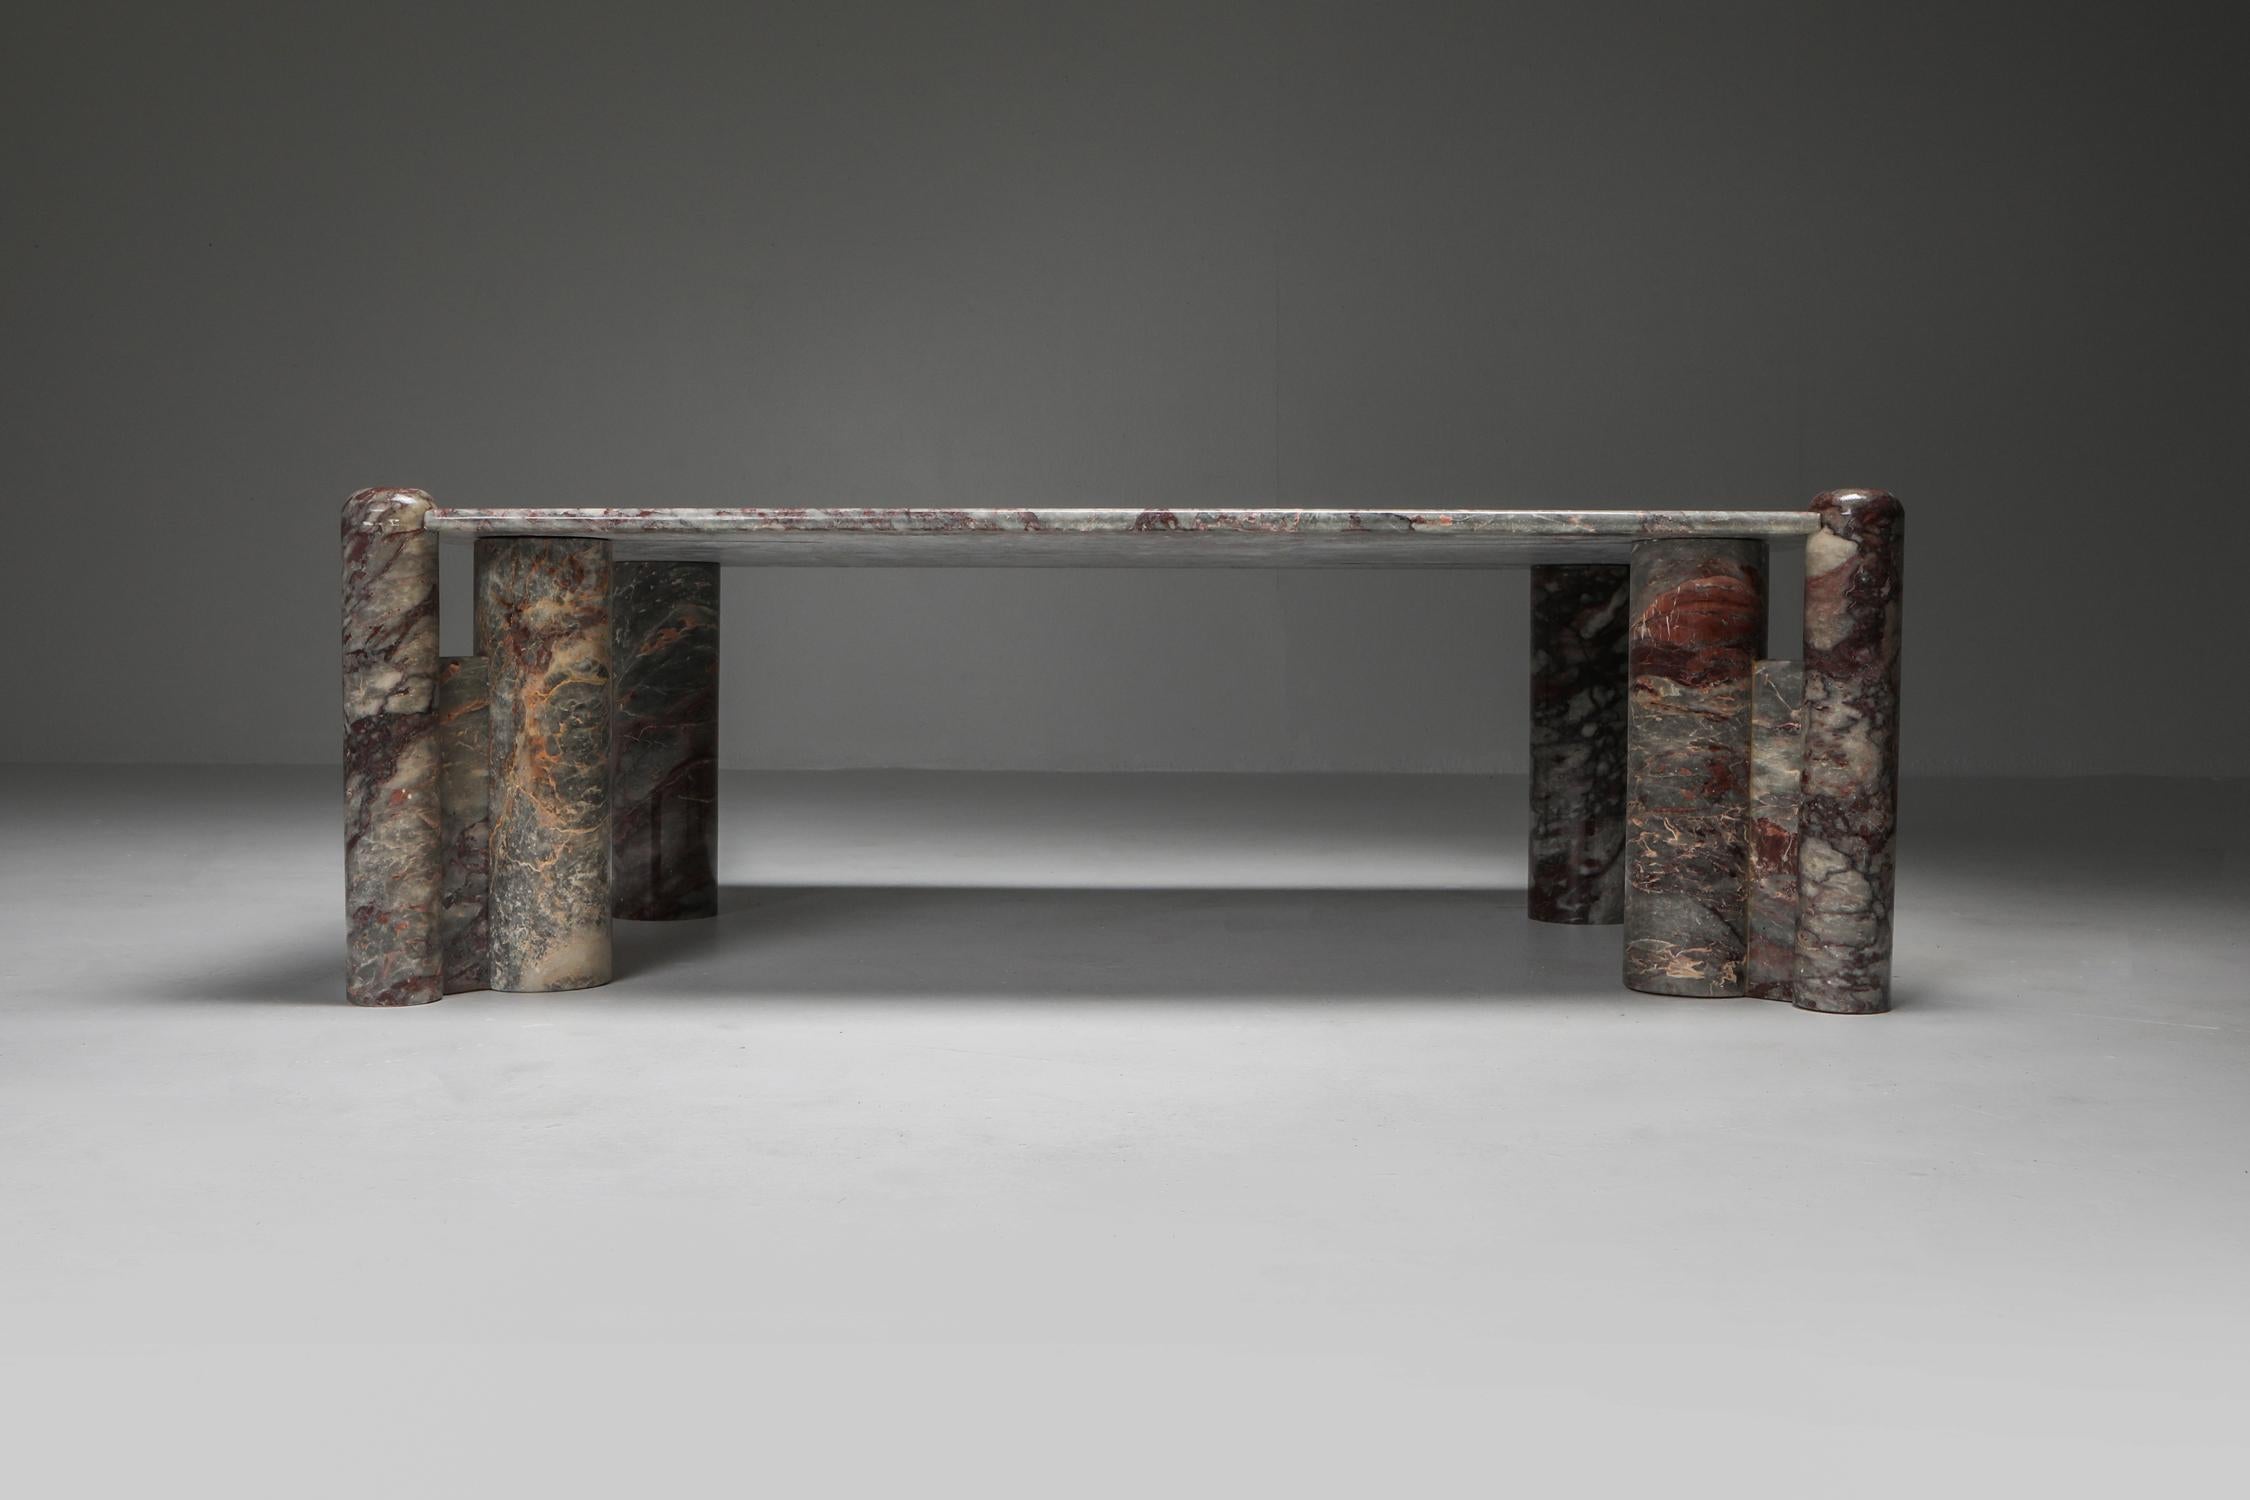 Jumbo coffee table, red and gray onyx, attributed to Gae Aulenti, Knoll, Italy, 1965.

The top and the legs come as five separate parts.
Italian architect and designer Gae Aulenti studied architecture at the Politecnico di Milano.
A member of